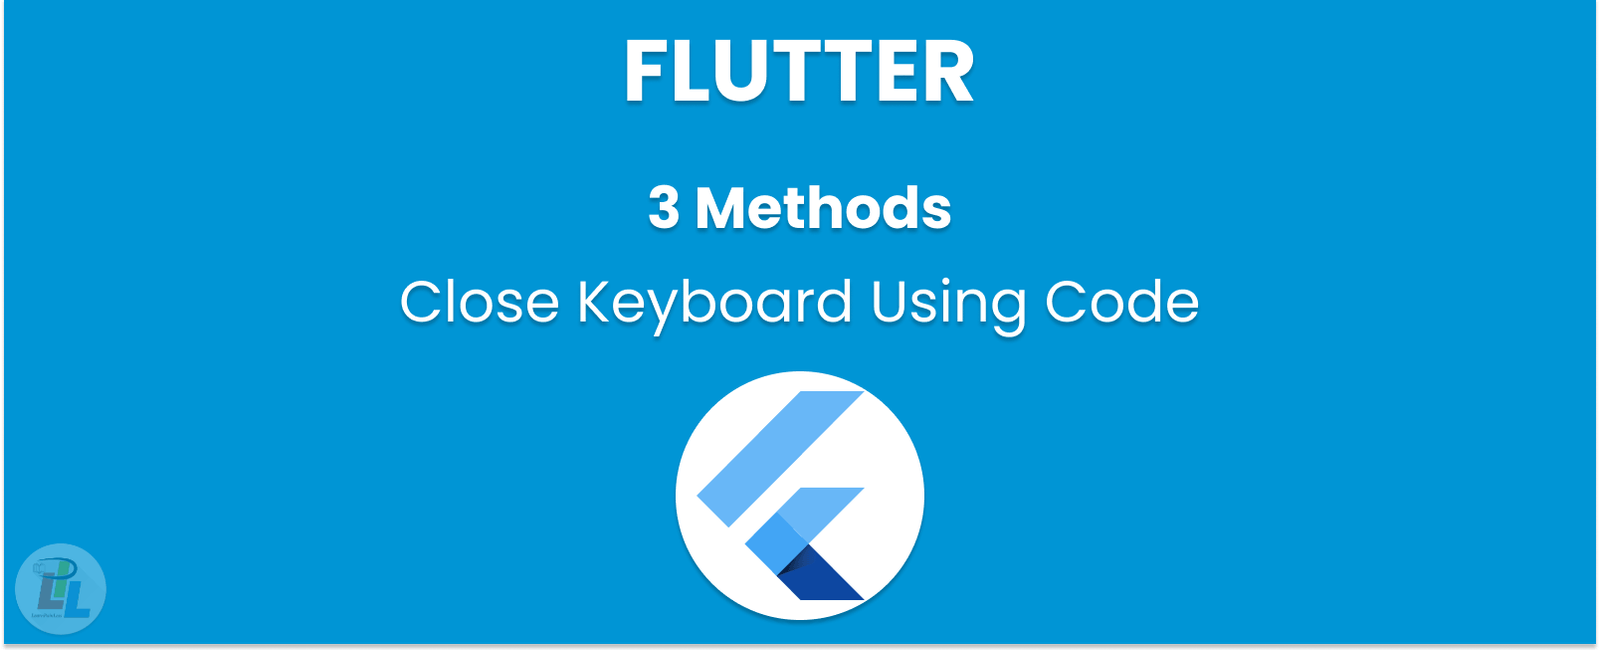 How to Close Keyboard Using Code in Flutter - 3 Methods